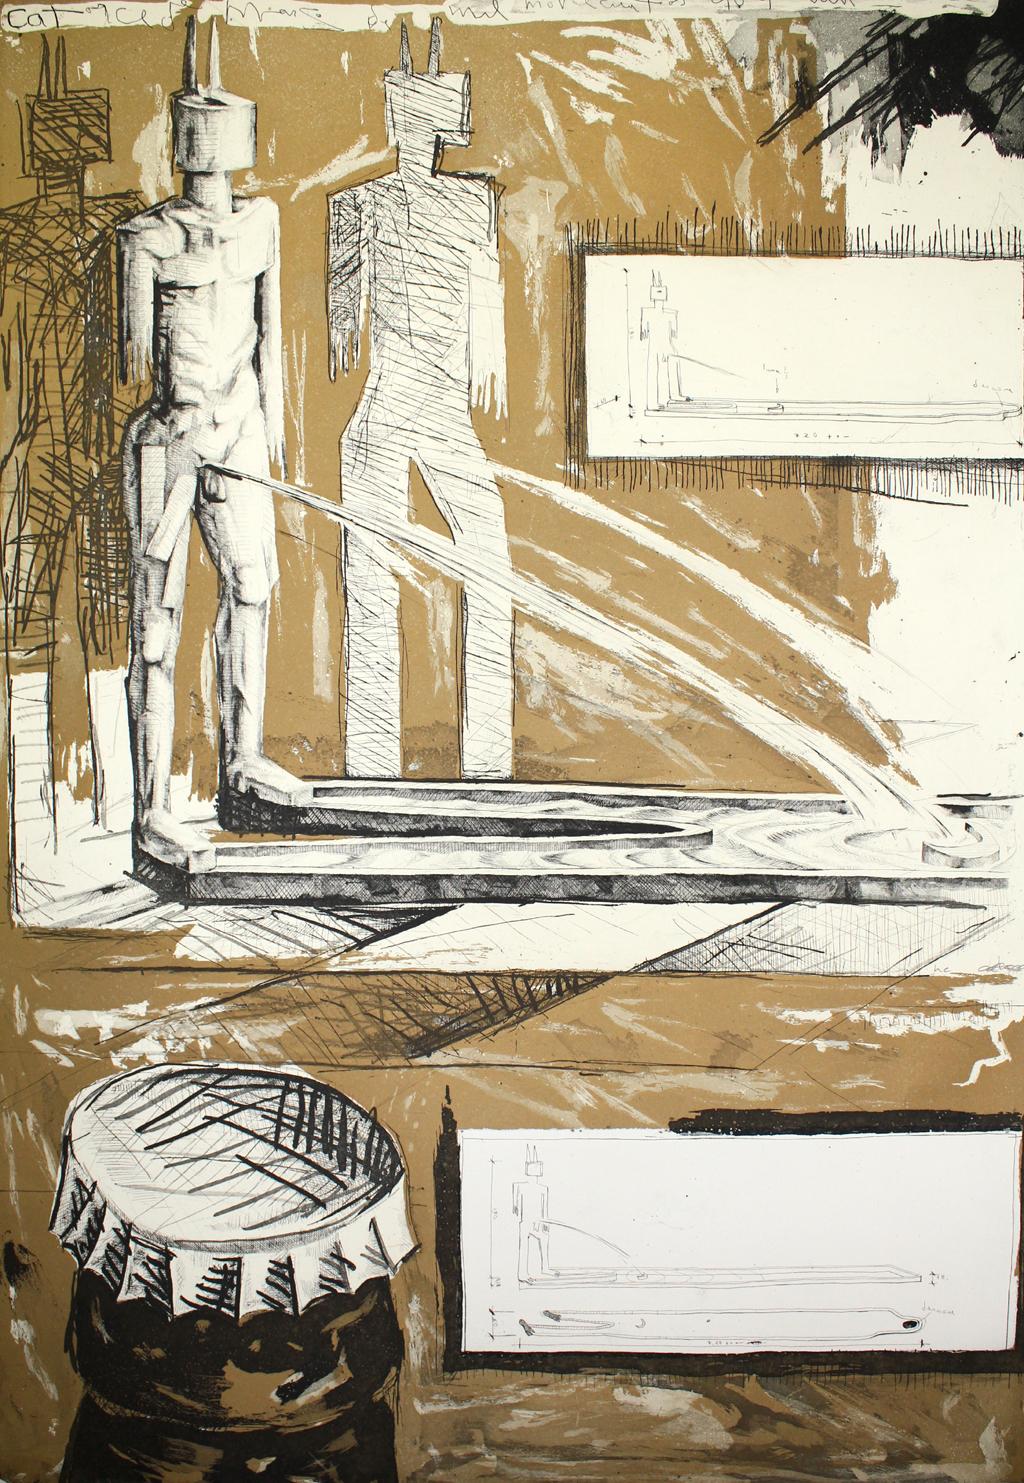 Andrés Nagel - UNTITLED 1
Date of creation: 1991
Medium: Etching and collage
Media: Paper
Edition: 75
Size: 98 x 69 cm
Condition: In very good conditions and never framed
Observations: Etching and collage on paper signed by the artist and numbered